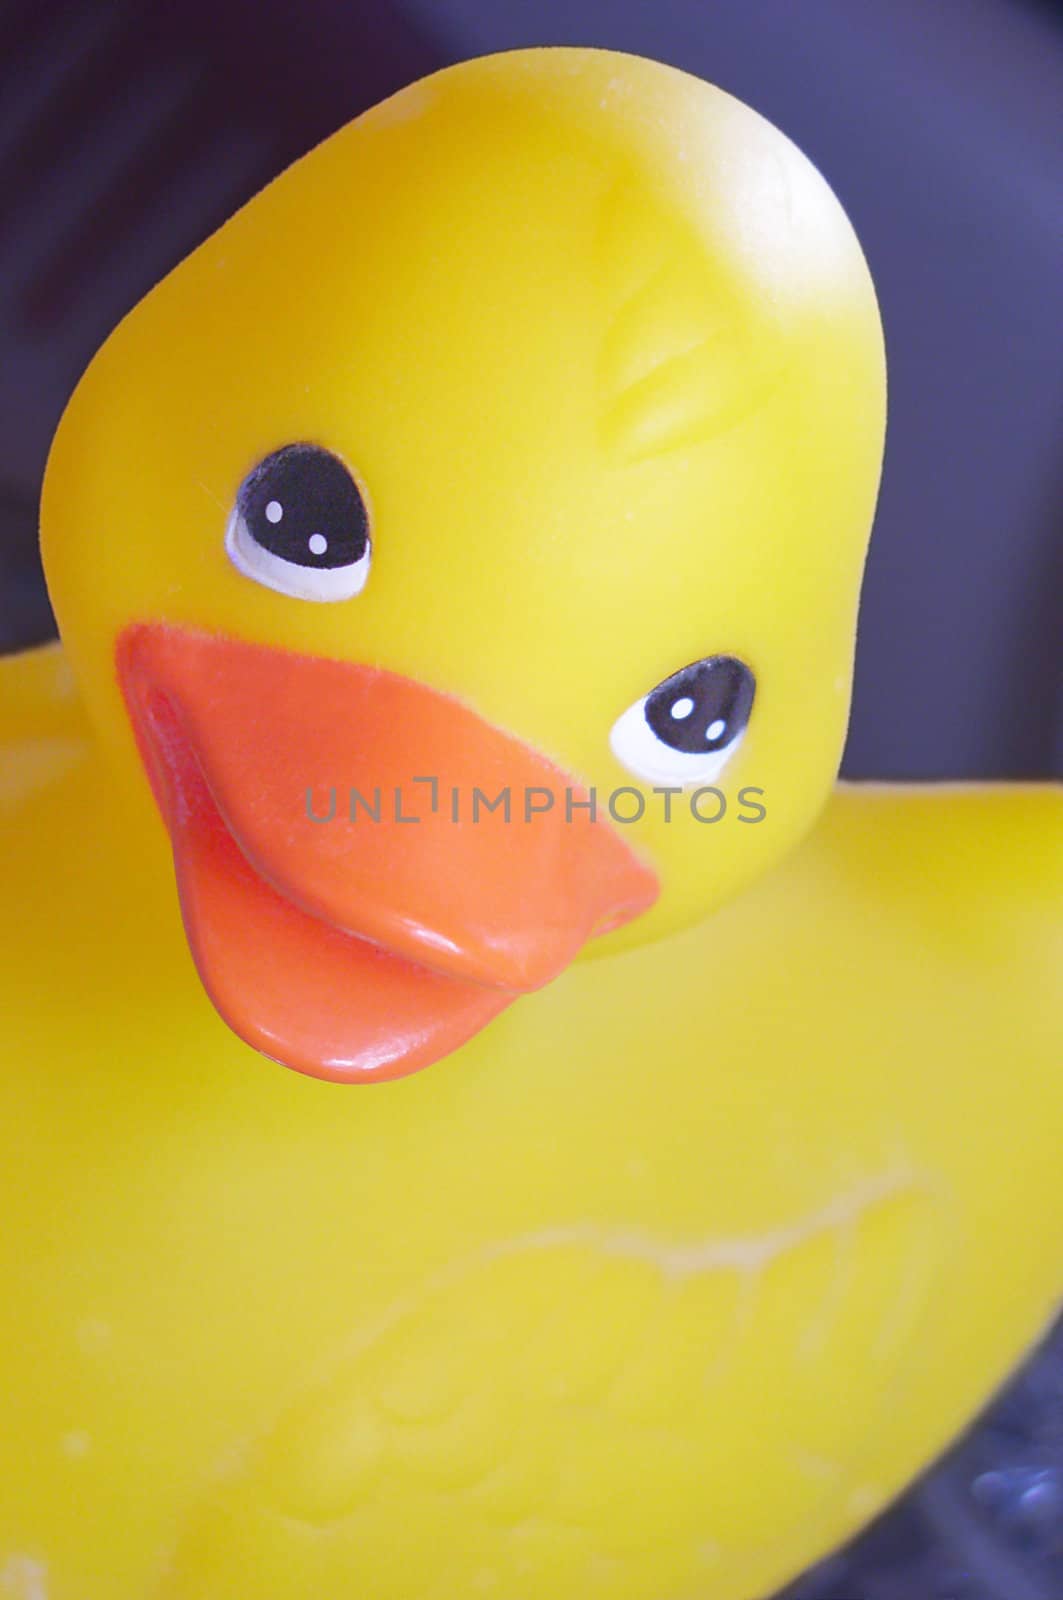 A bright yellow rubber duck toy, shot in portrait style close-up over a dark blue background.